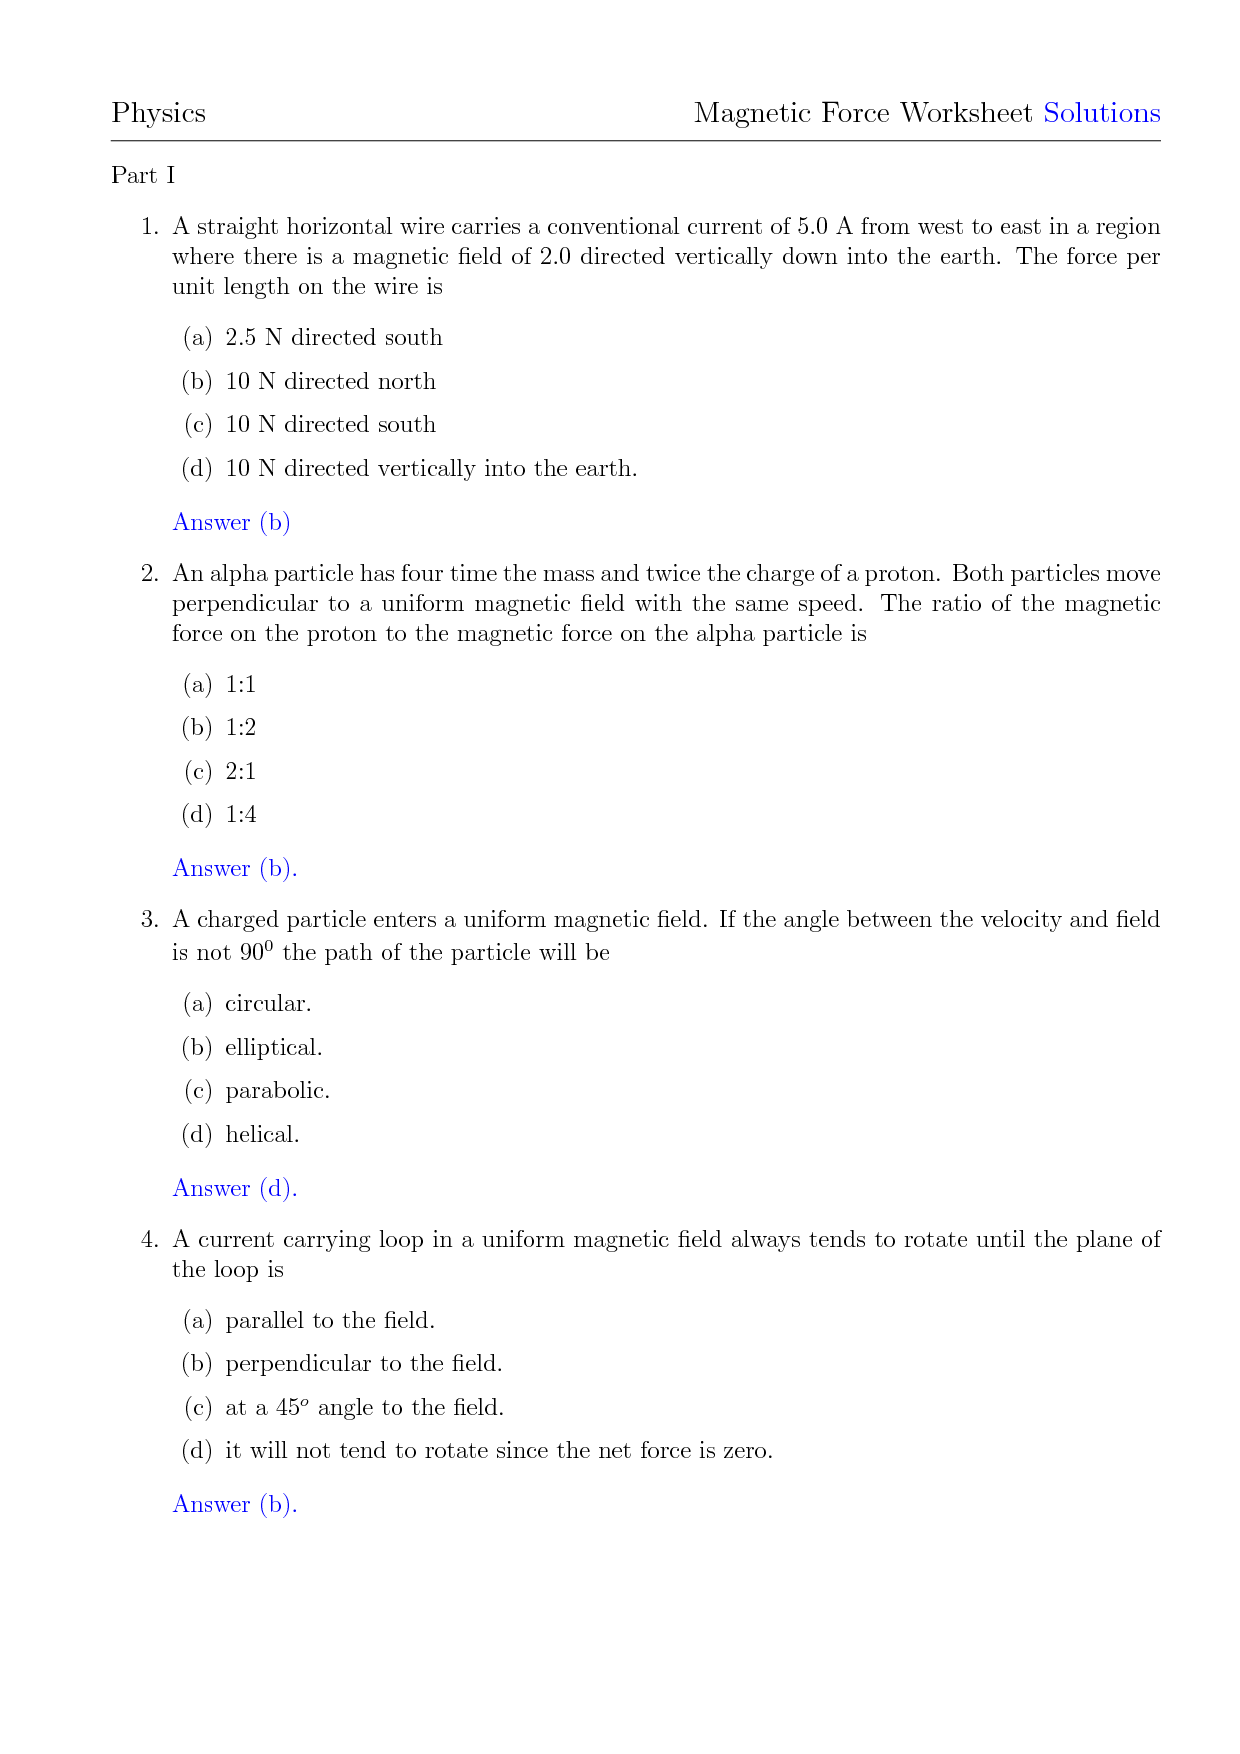 Motion and Momentum Worksheet Answers Image